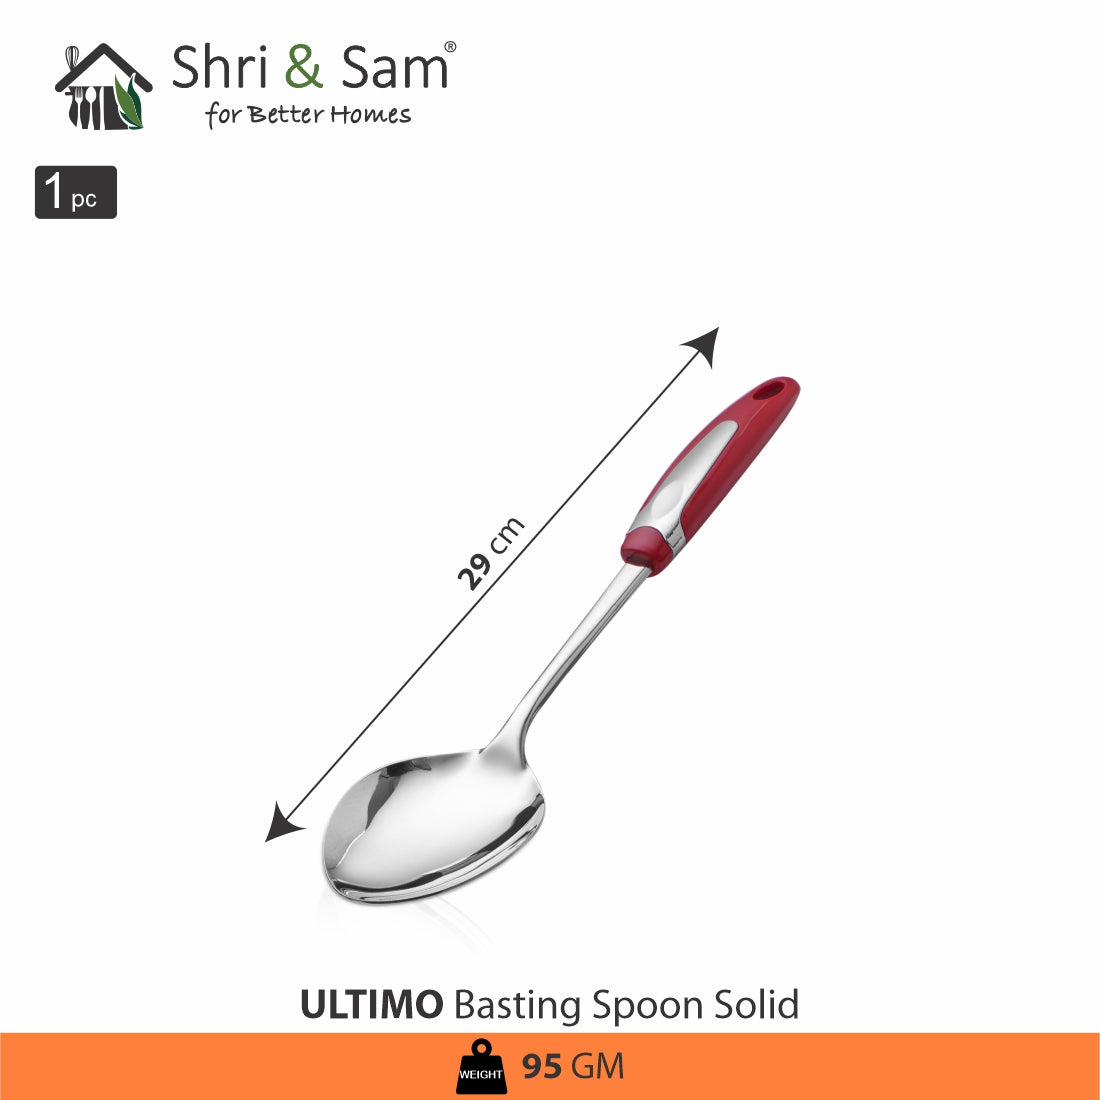 Stainless Steel Basting Spoon Solid Ultimo